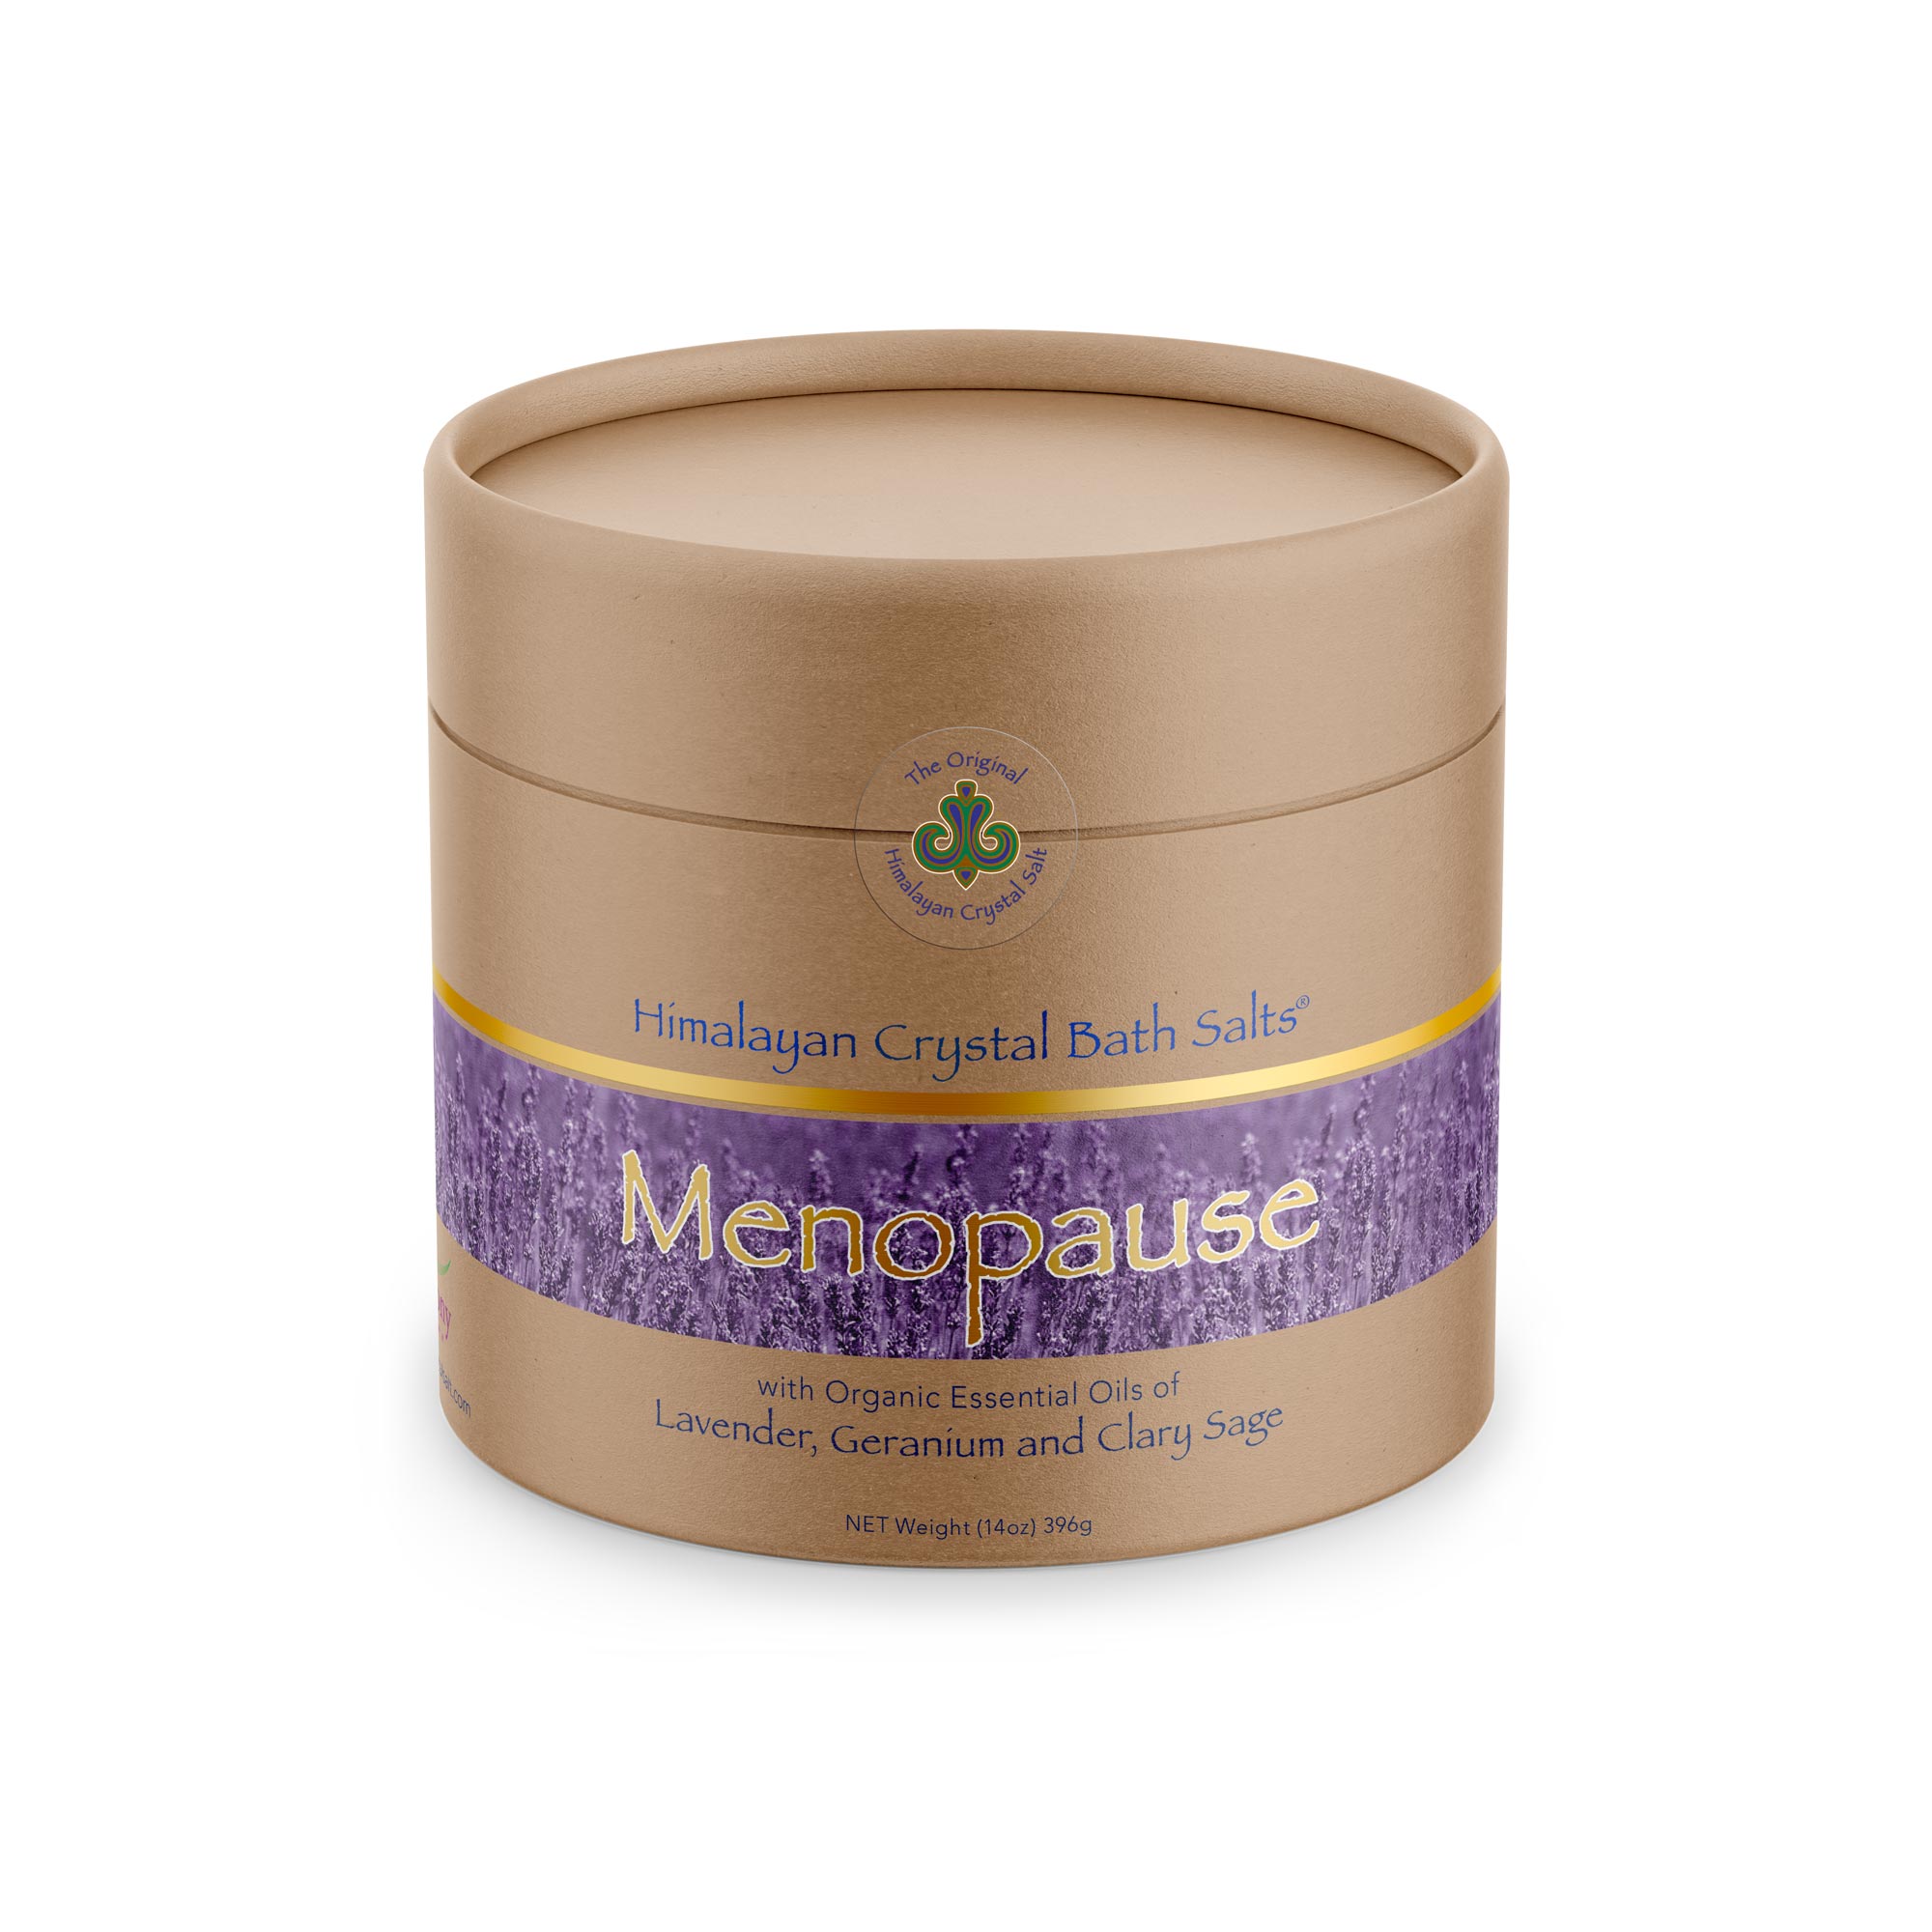 Menopause Bath Salts front of tan product box with bands of gold and lavender flowers featuring Himalayan Crystal Salt logo